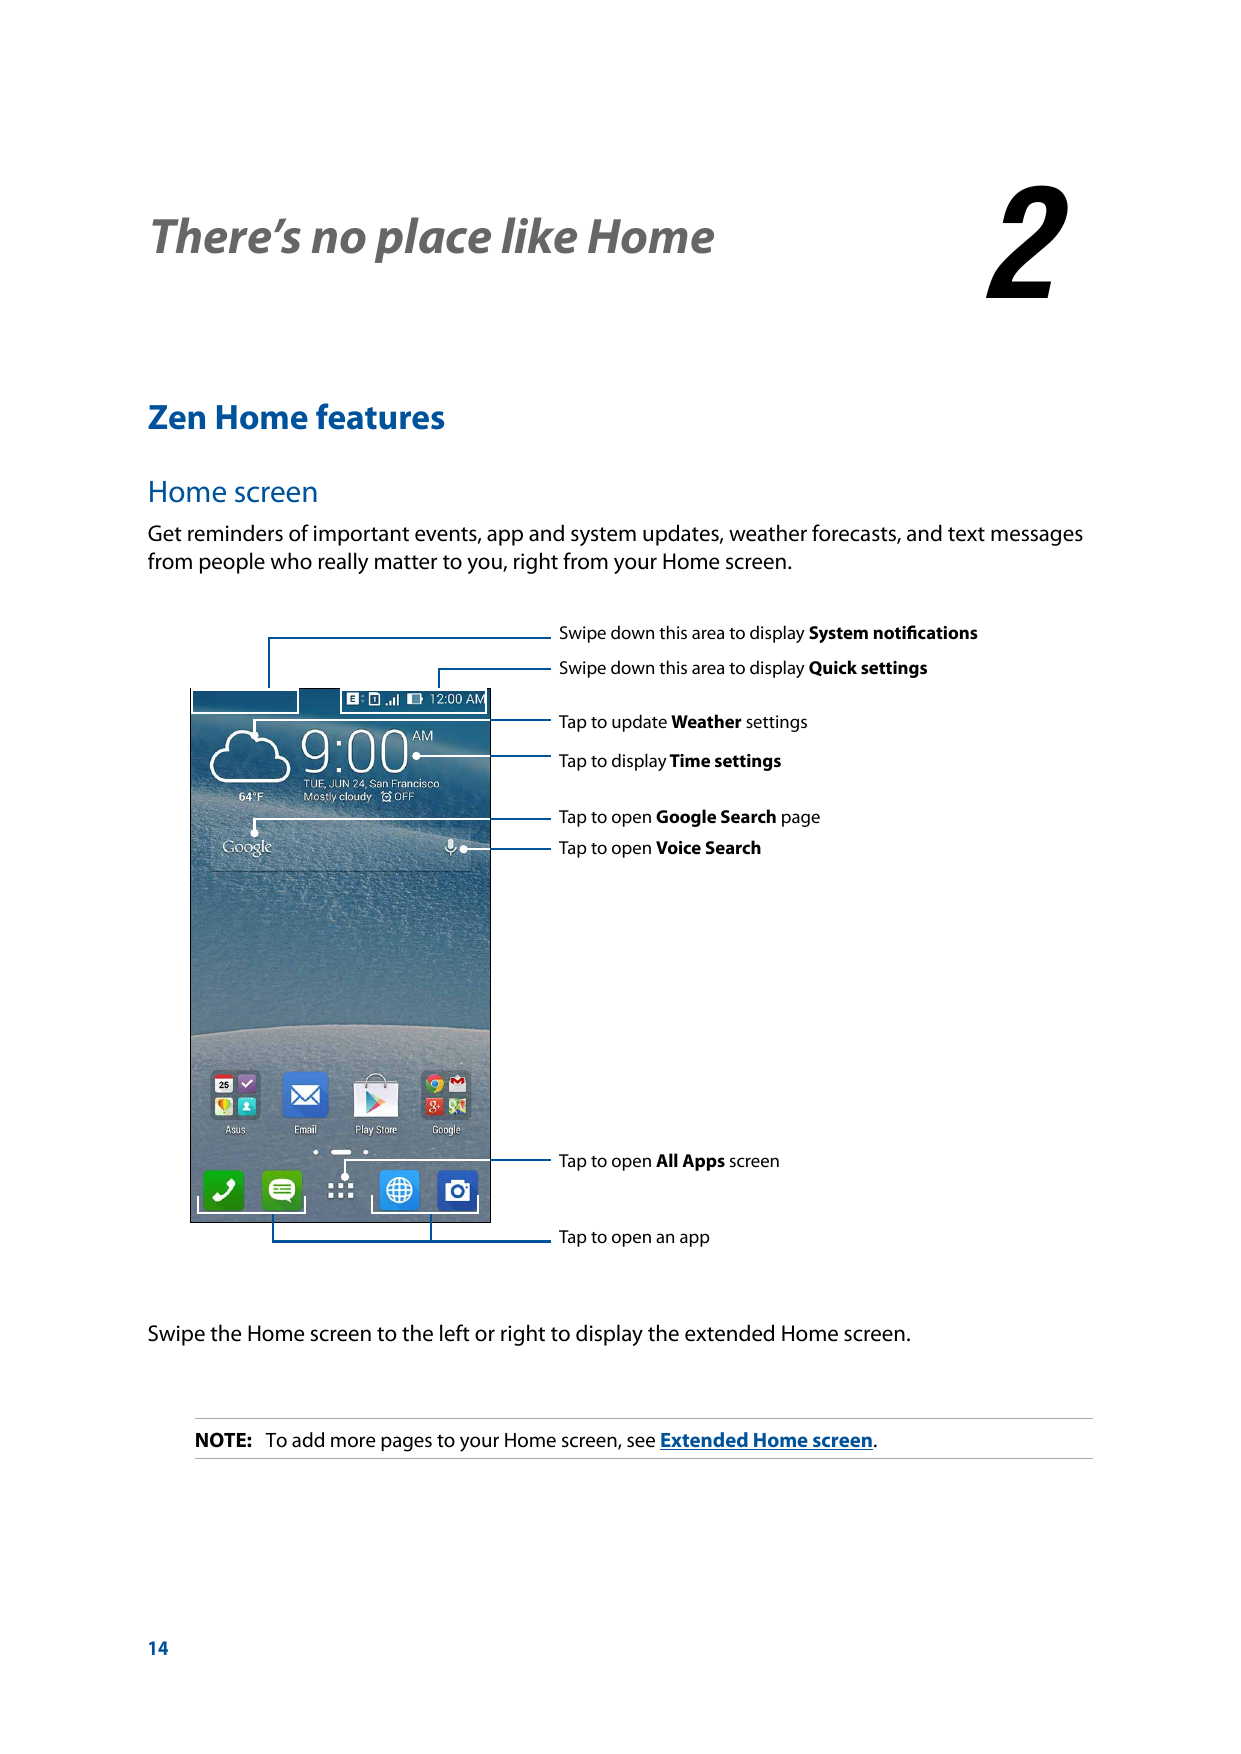 2There’s no place like HomeThere’s no place like Home2Zen Home featuresHome screenGet reminders of important events, app and sys